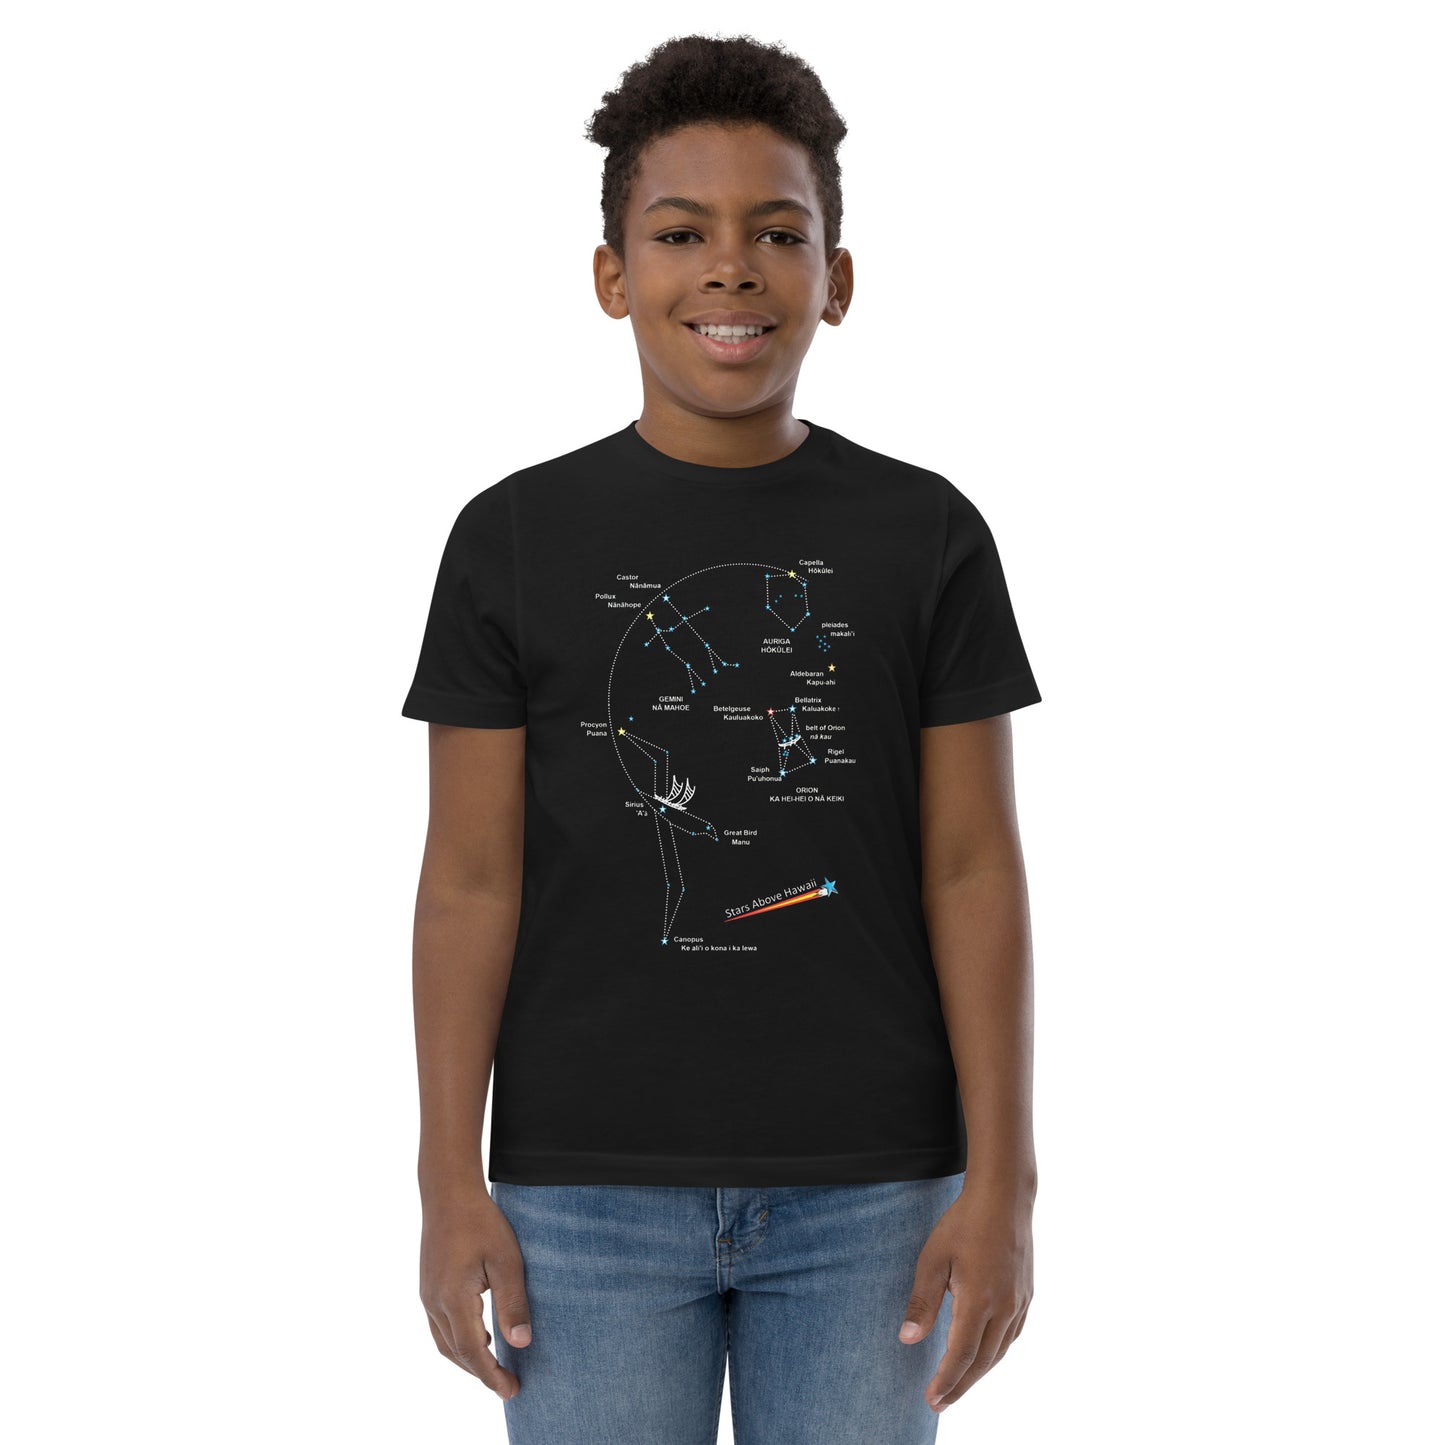 T-Shirt - Hawaii Stars with Rising Star - Youth (Child and Teen)